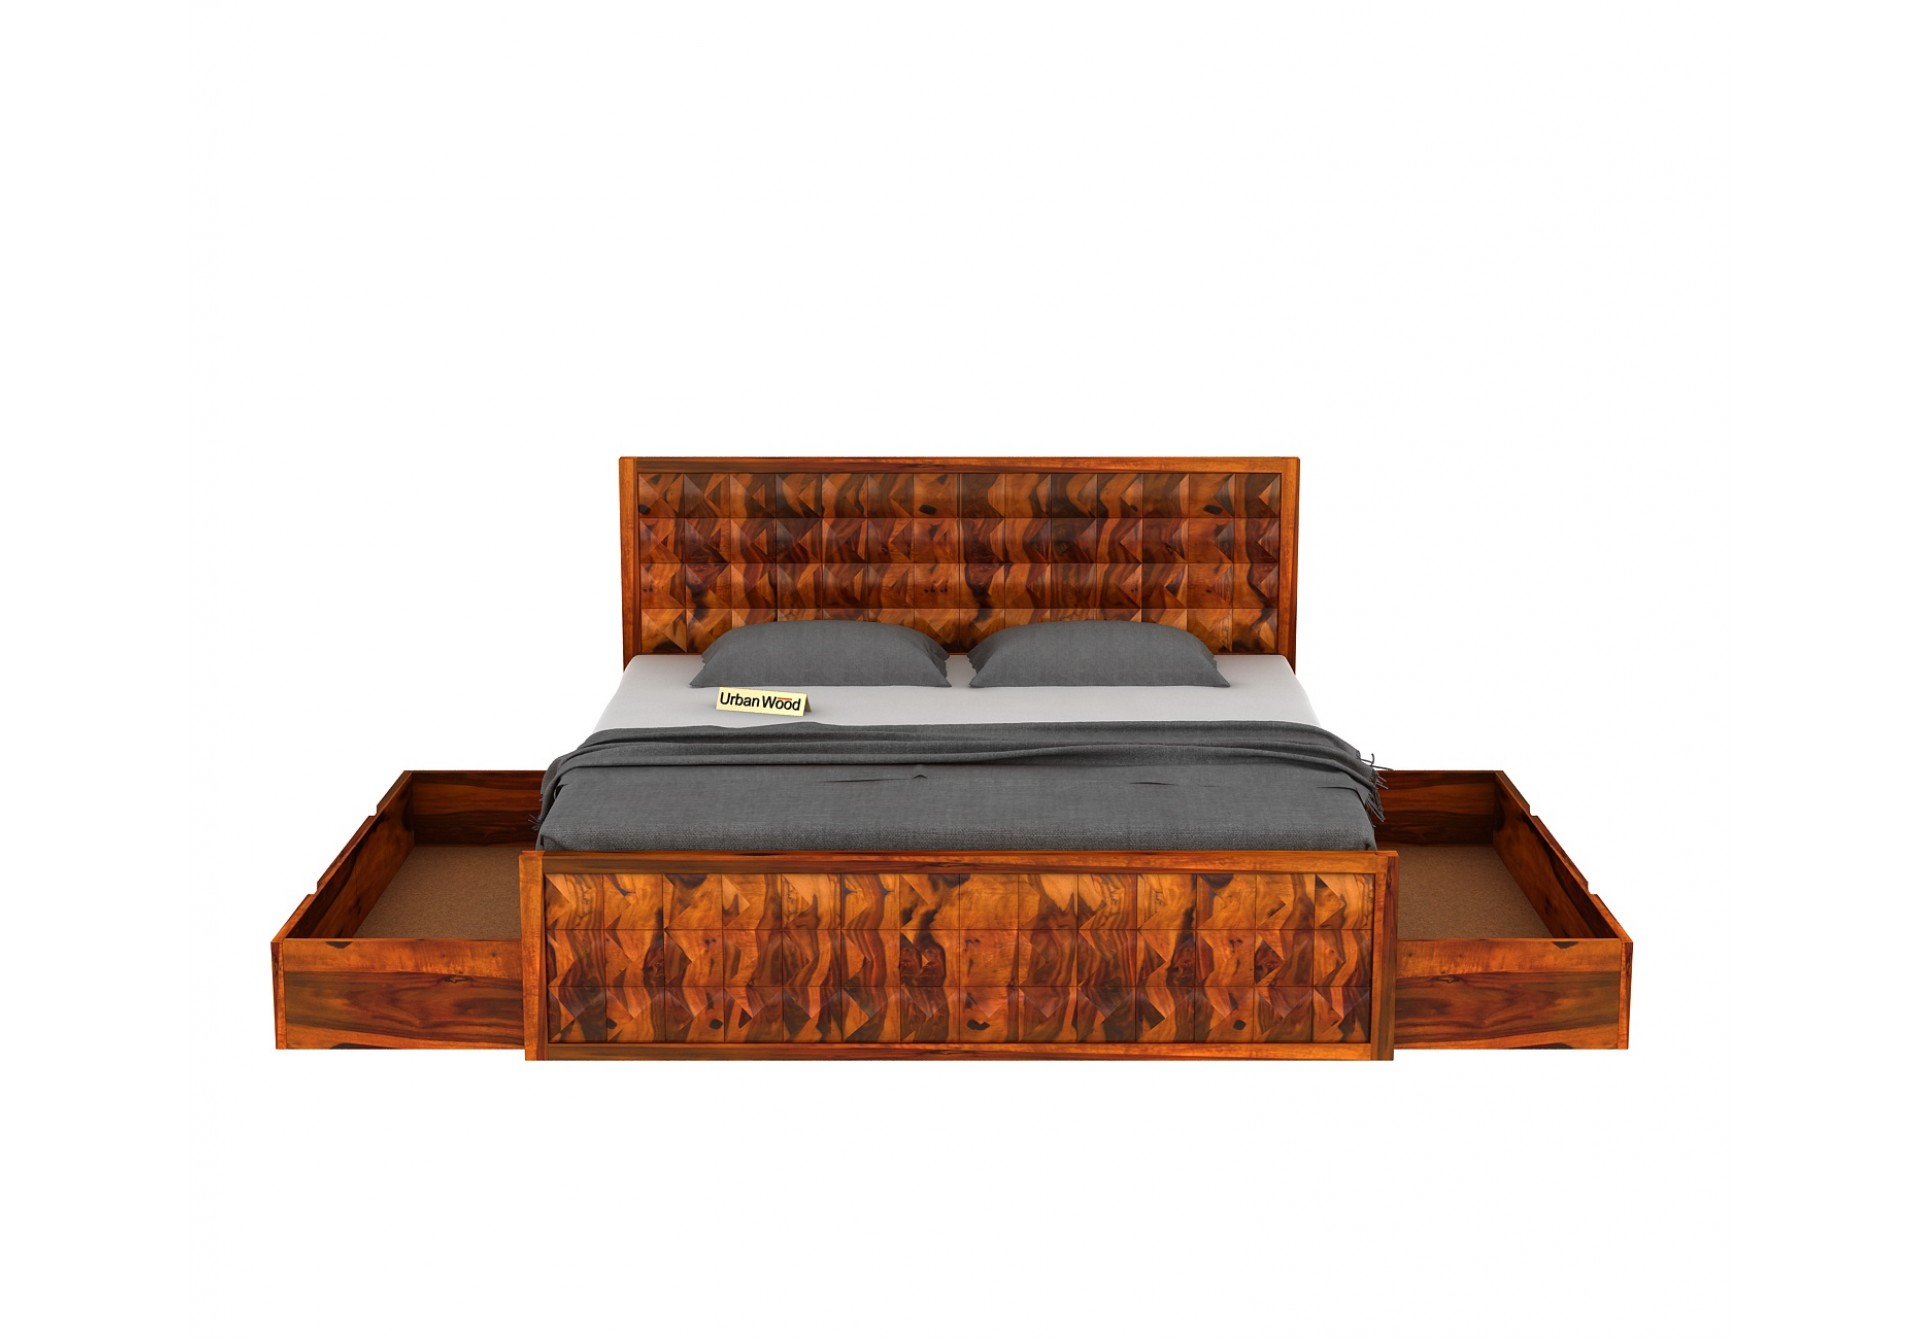 Morgana Bed With Storage ( Queen Size, Honey Finish )